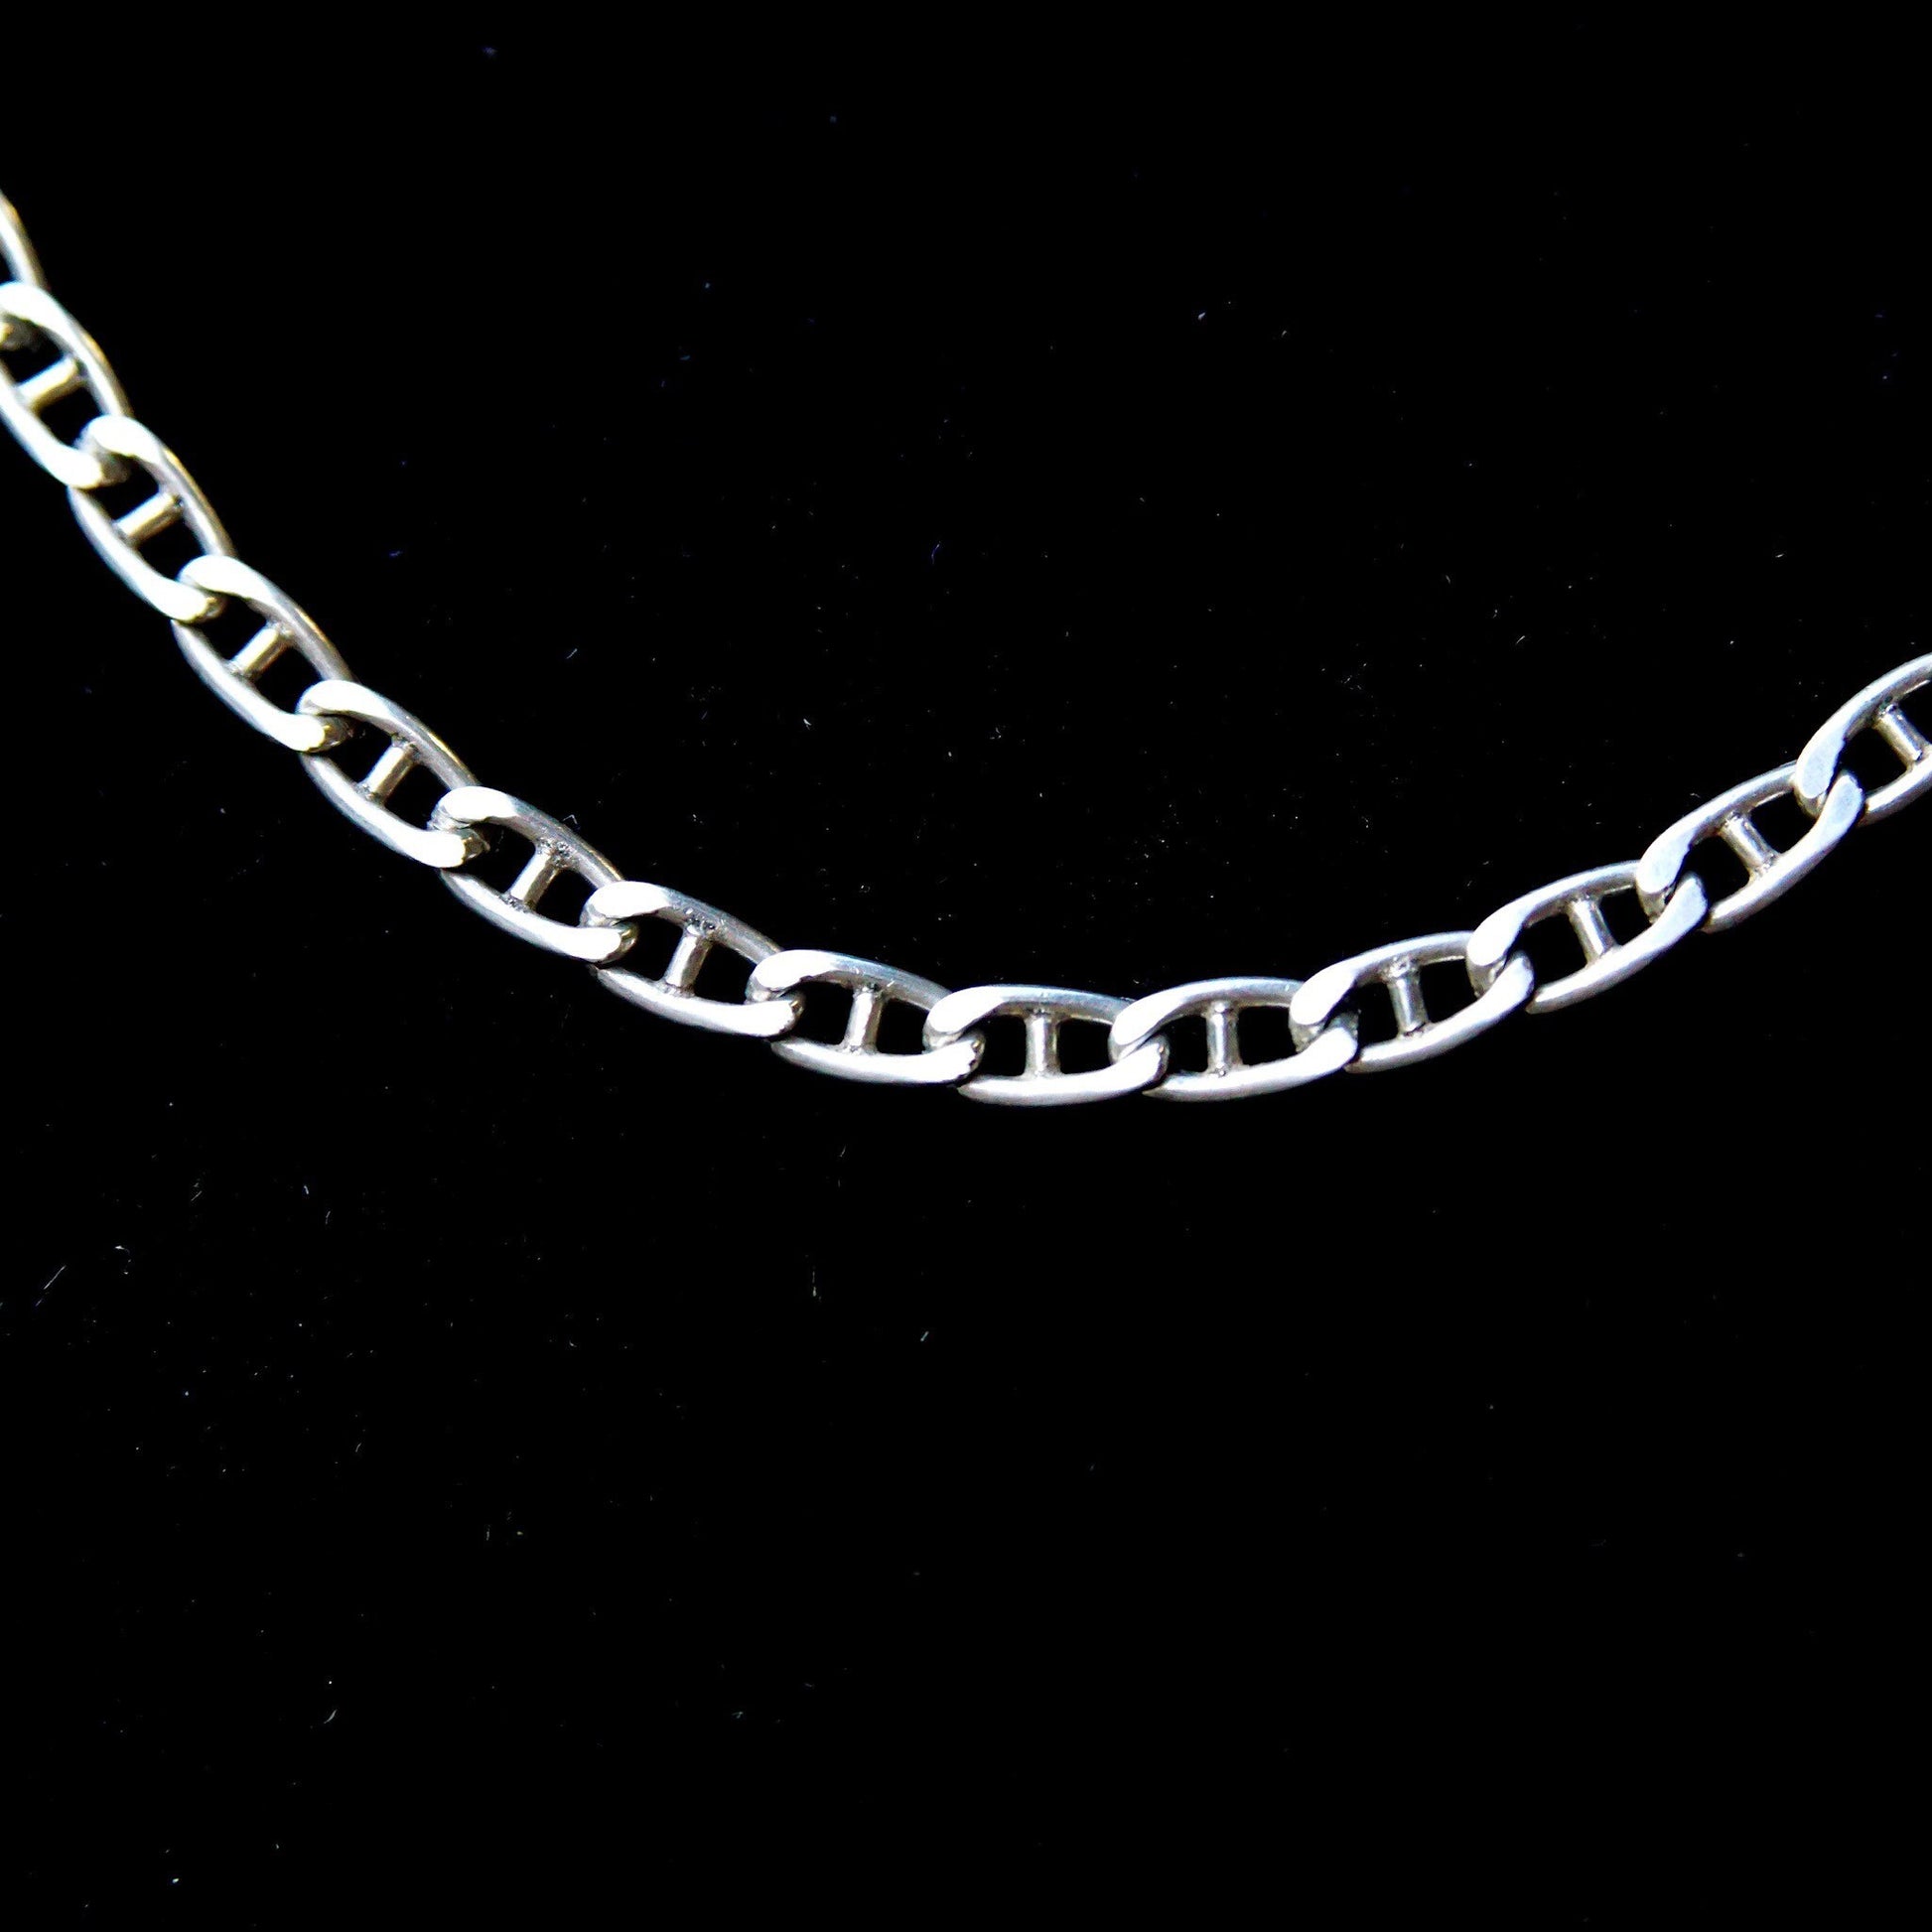 Vintage Italian sterling silver mariner chain necklace, 3.5mm anchor chain links, minimalist unisex solid silver necklace, 18 1/4 inches long, on black background